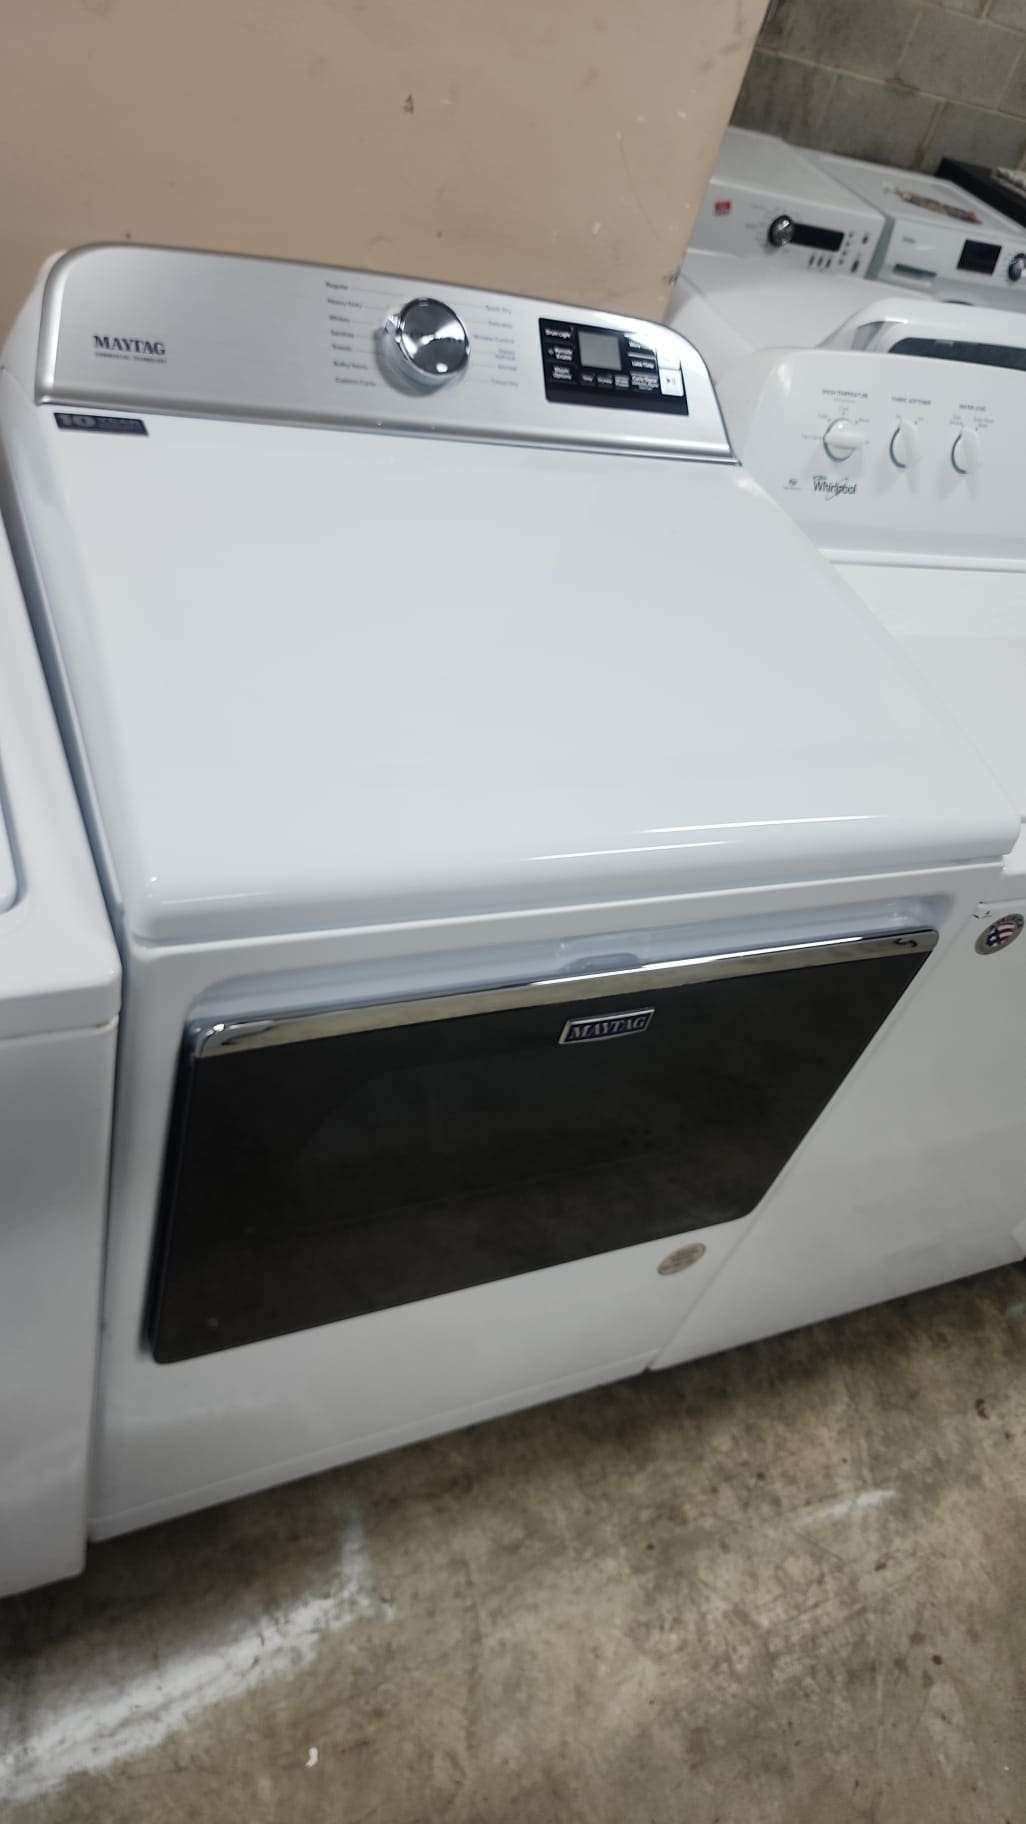 Maytag Refurbished Like New Front Load Dryer – White